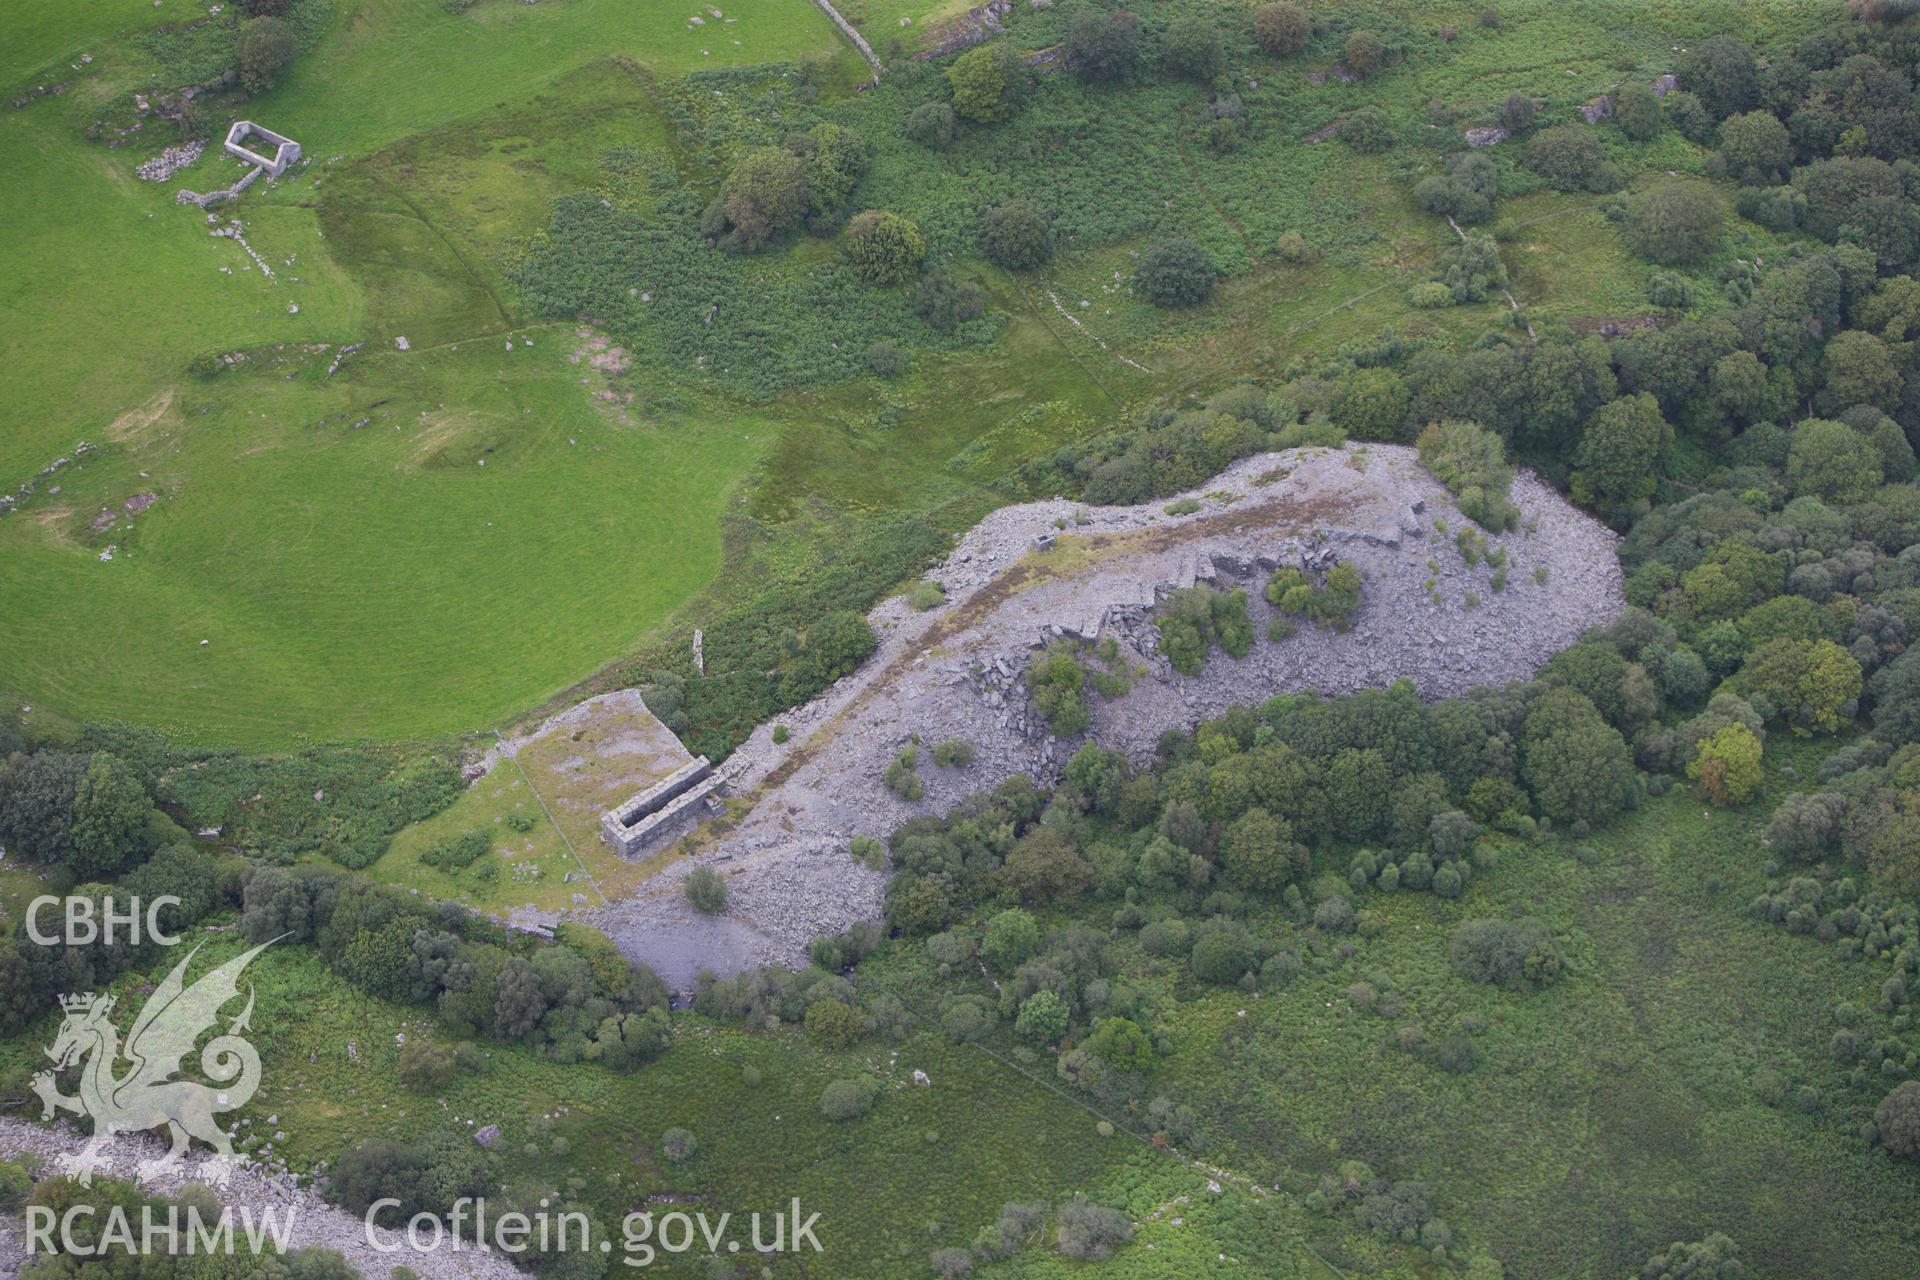 RCAHMW colour oblique aerial photograph of Rhos Quarry (Slate and Slab Works), Capel Curig. Taken on 06 August 2009 by Toby Driver